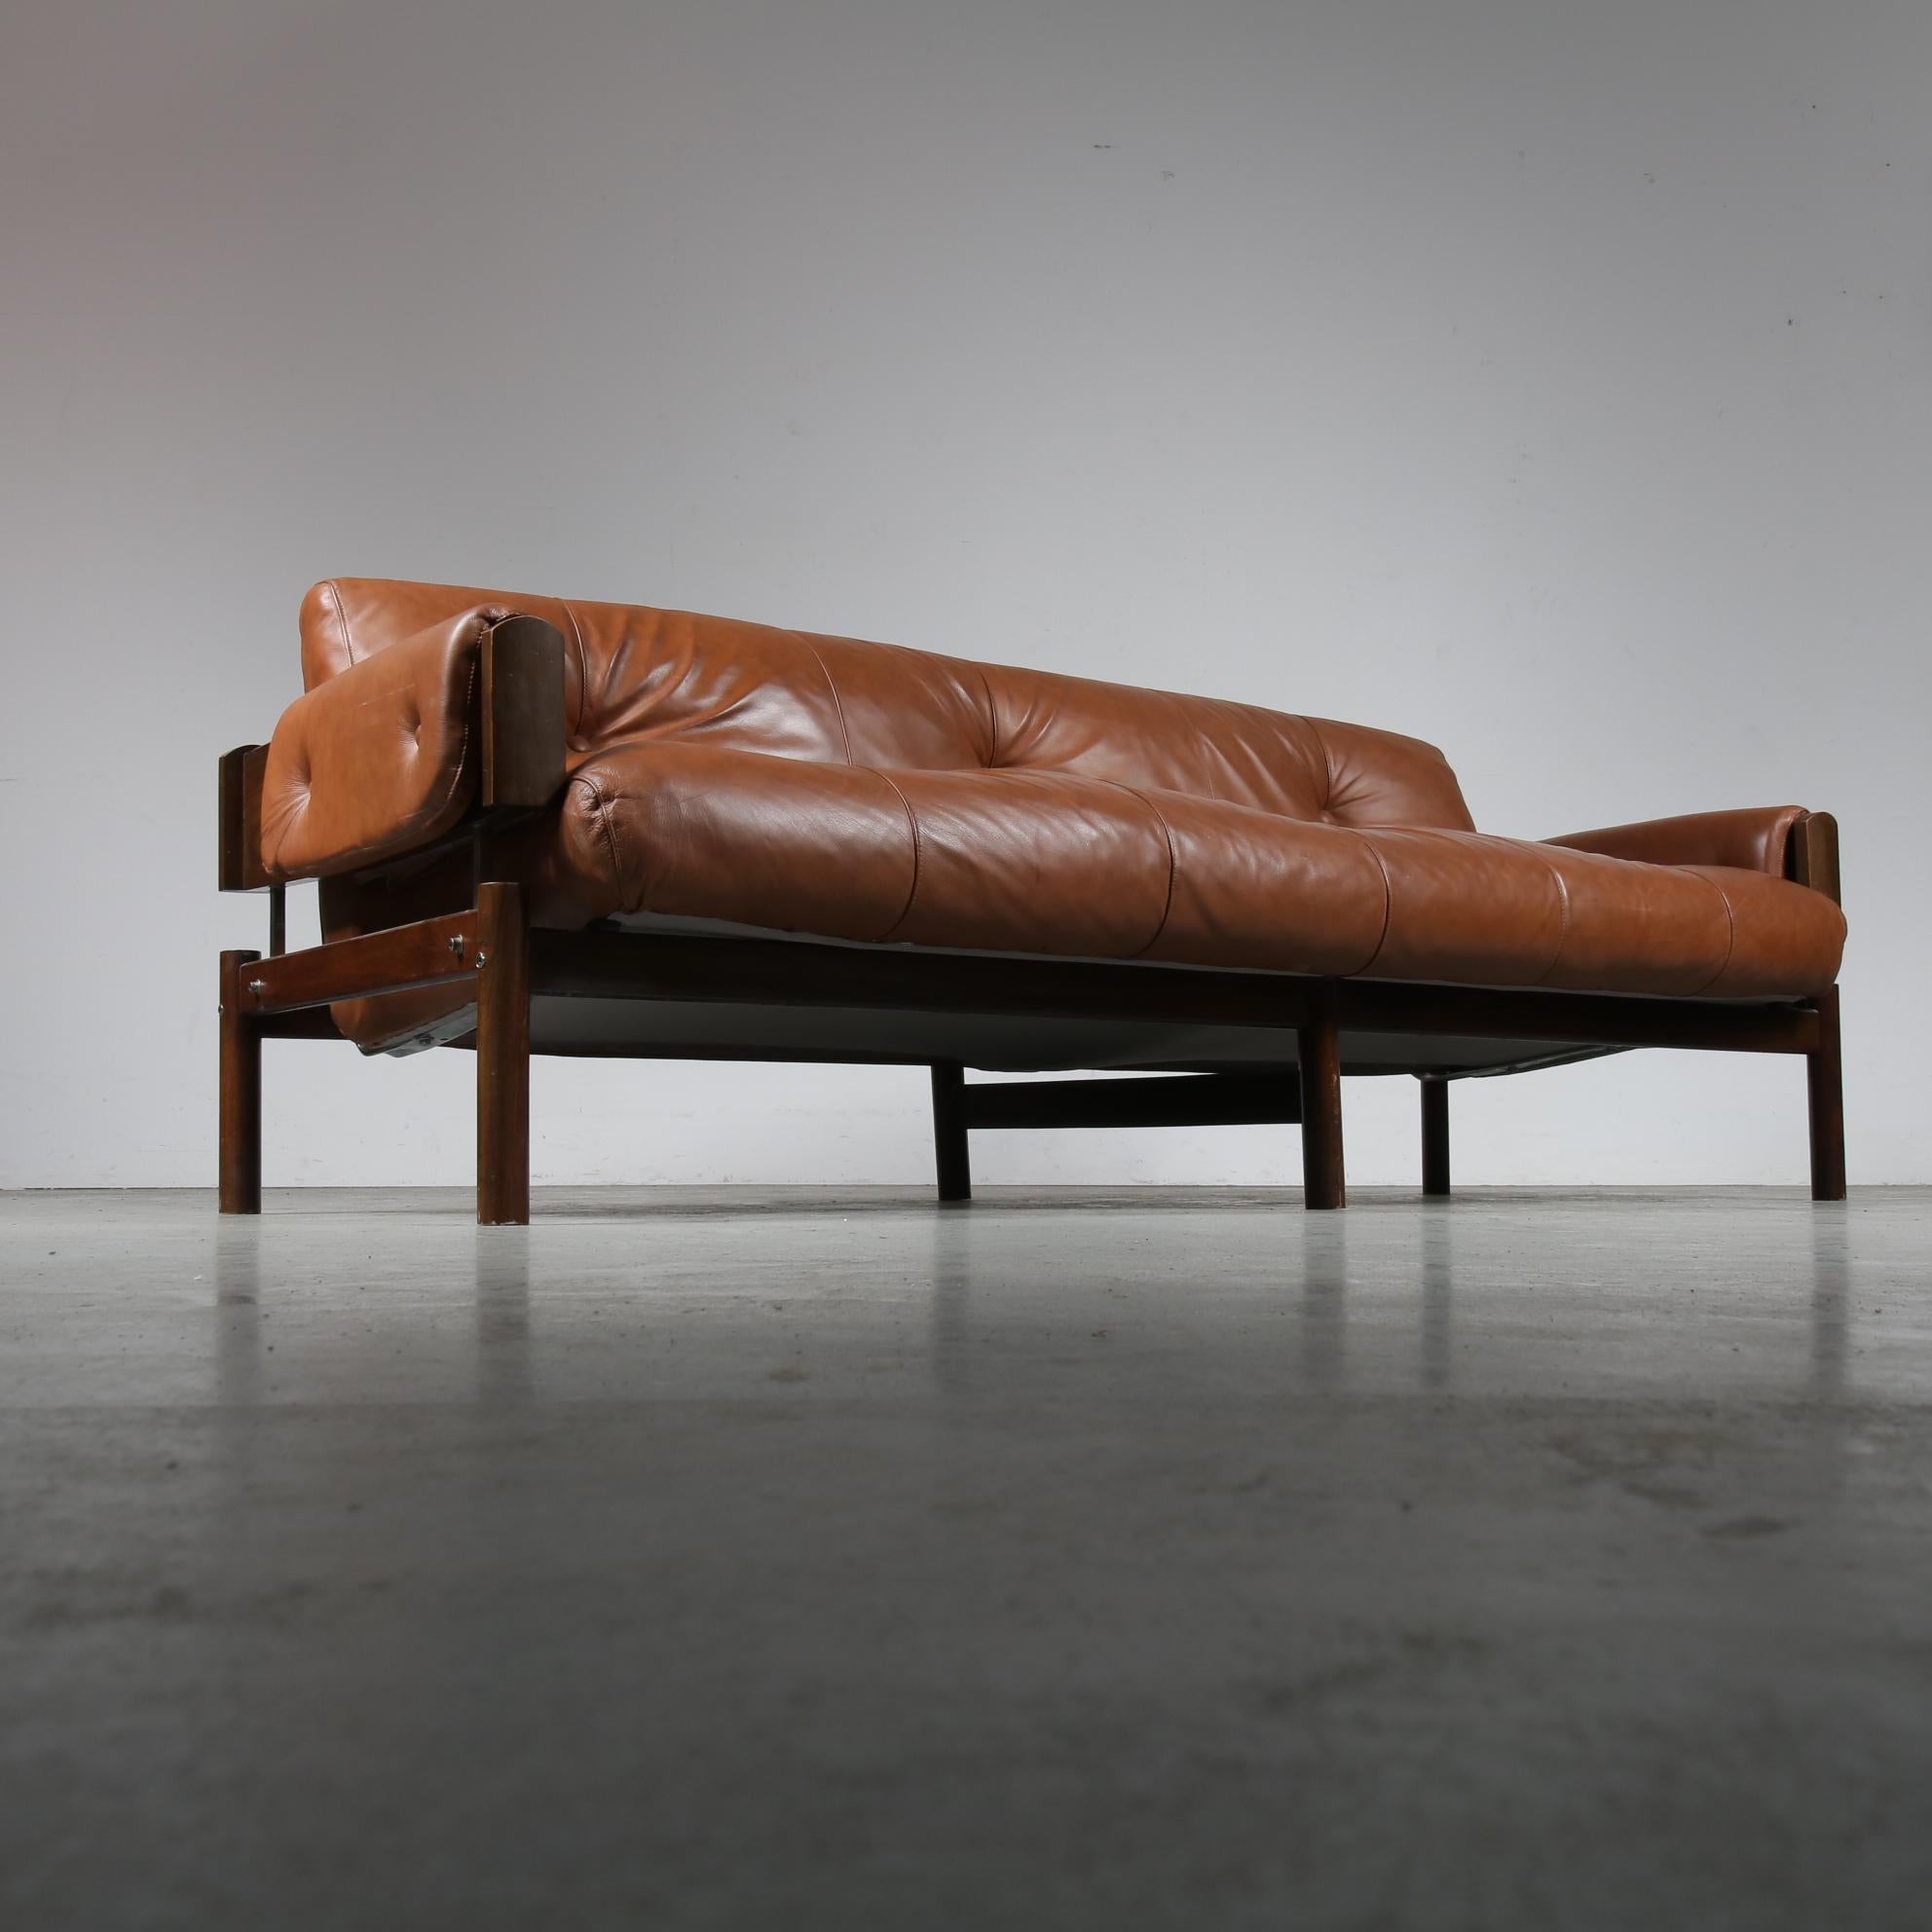 A wonderful sofa designed by Percival Lafer, made in Brazil in the 1970s.

The three-seater sofa is made of high quality, deep brown Brazilian hardwood. The comfortable seat, back and armrests are upholstered in high quality cognac leather, all